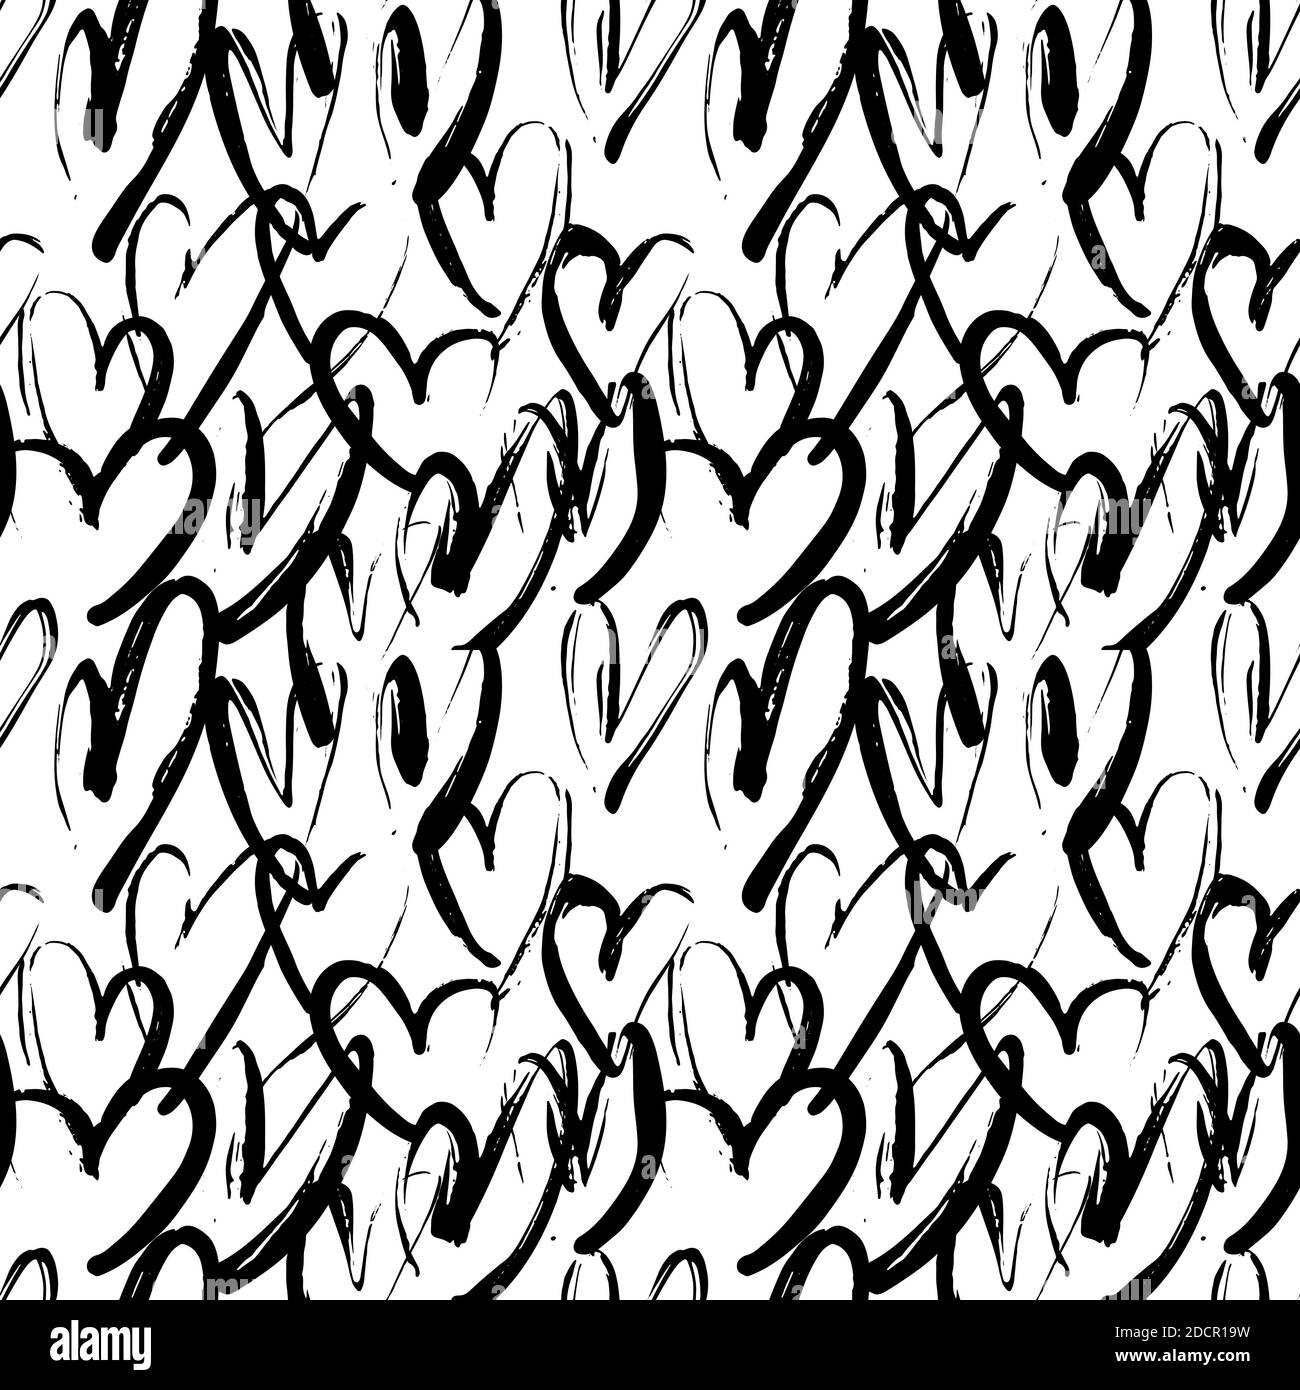 Rough Black Art Paper Seamless Texture Blank Page Background Stock